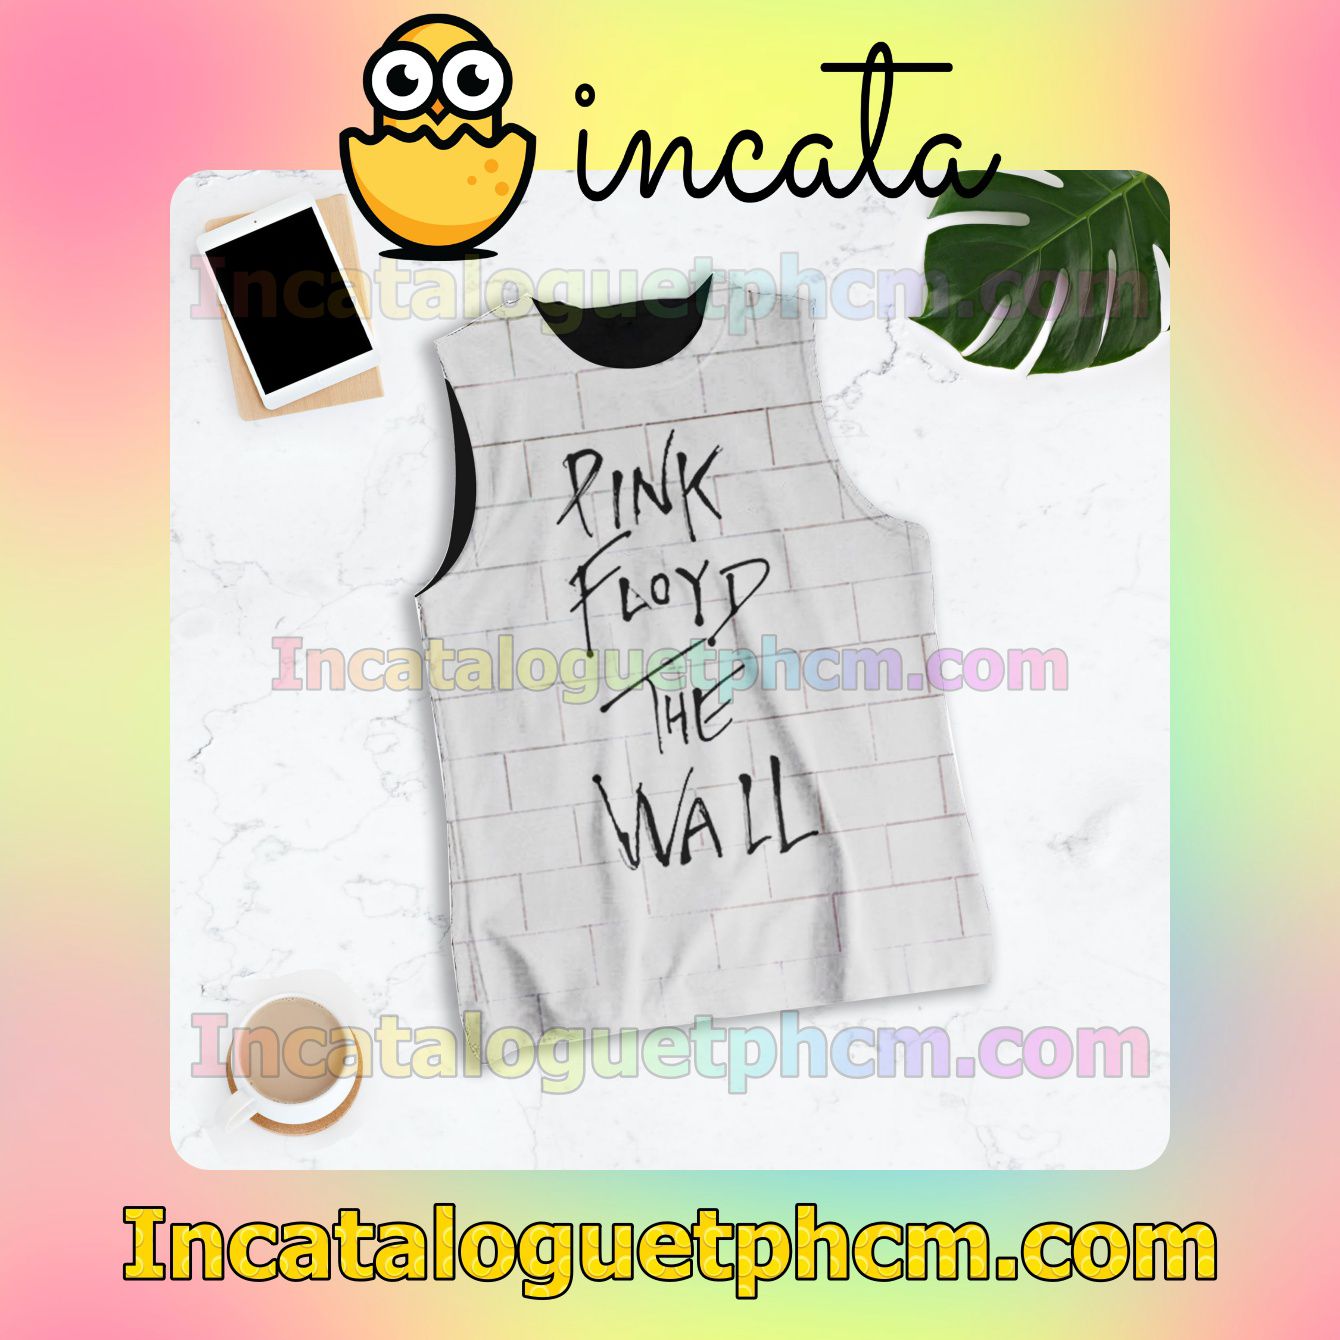 Pink Floyd The Wall Album Cover Racerback Tank